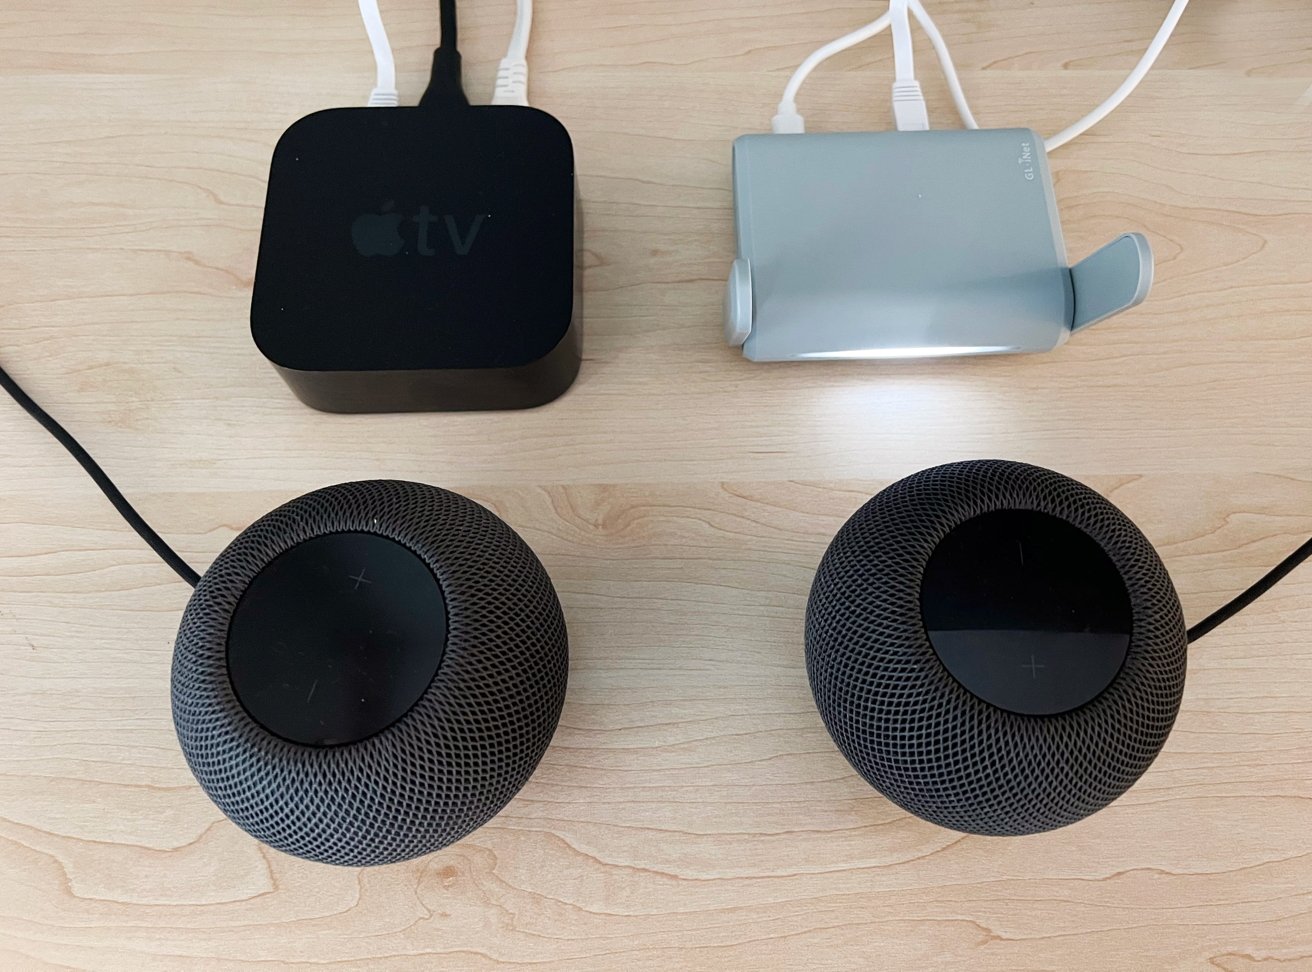 You may want to connect HomePods and an Apple TV, but a hotel network is usually not set up to allow that to happen. 